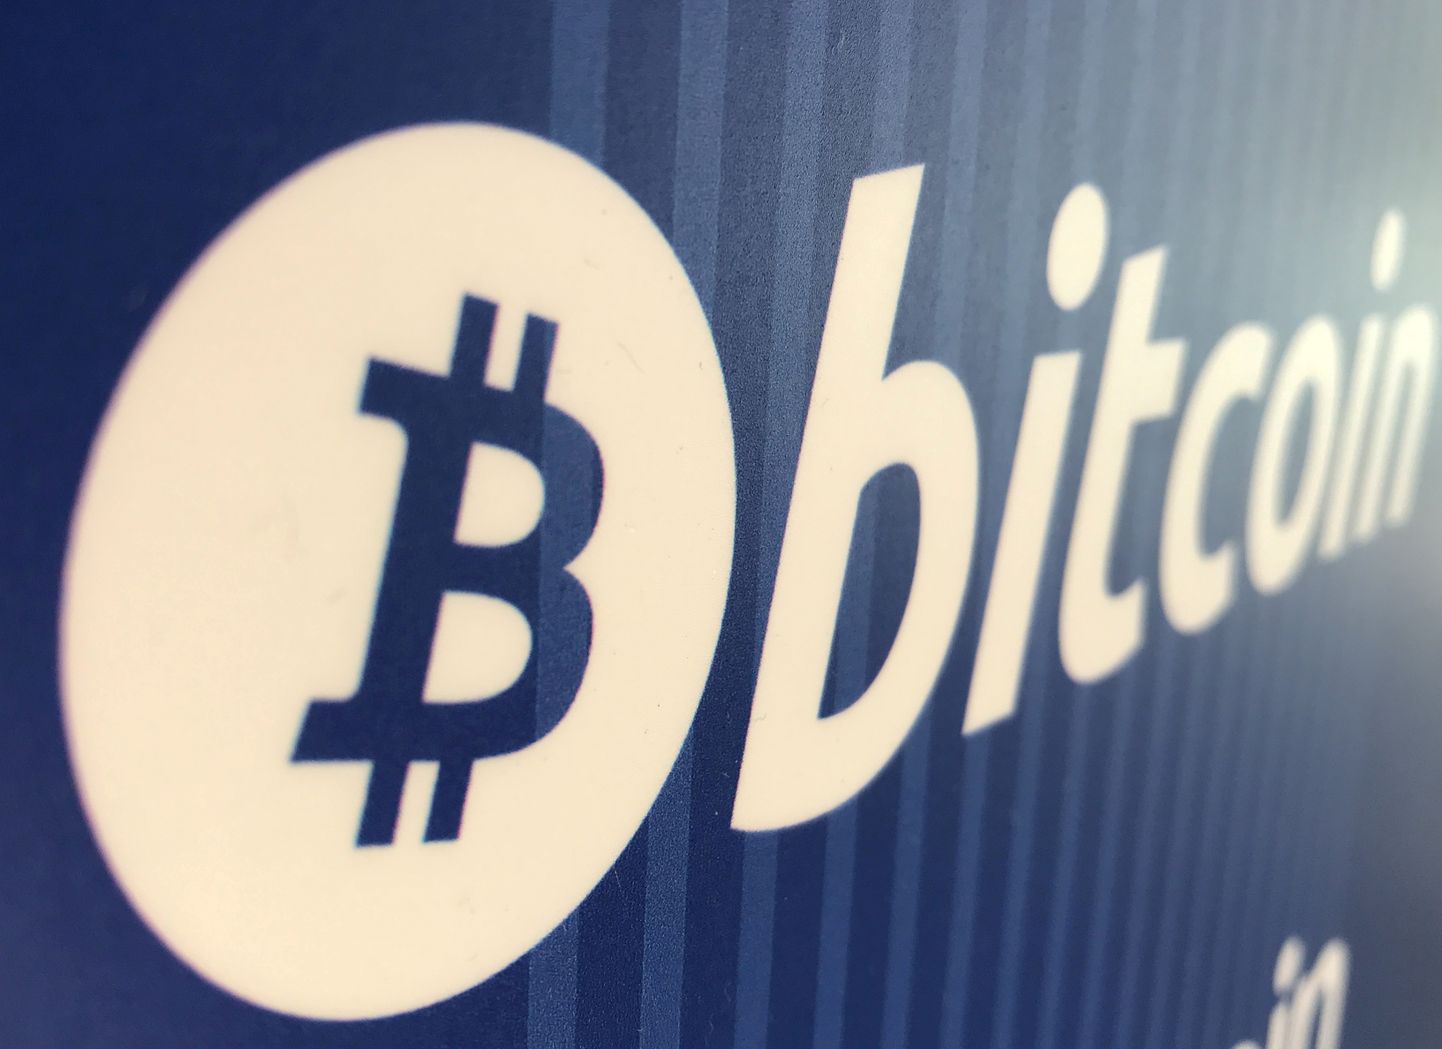 FILE PHOTO: A Bitcoin logo is seen on a cryptocurrency ATM in Santa Monica, California, U.S., January 4, 2018. REUTERS/Lucy Nicholson/File Photo